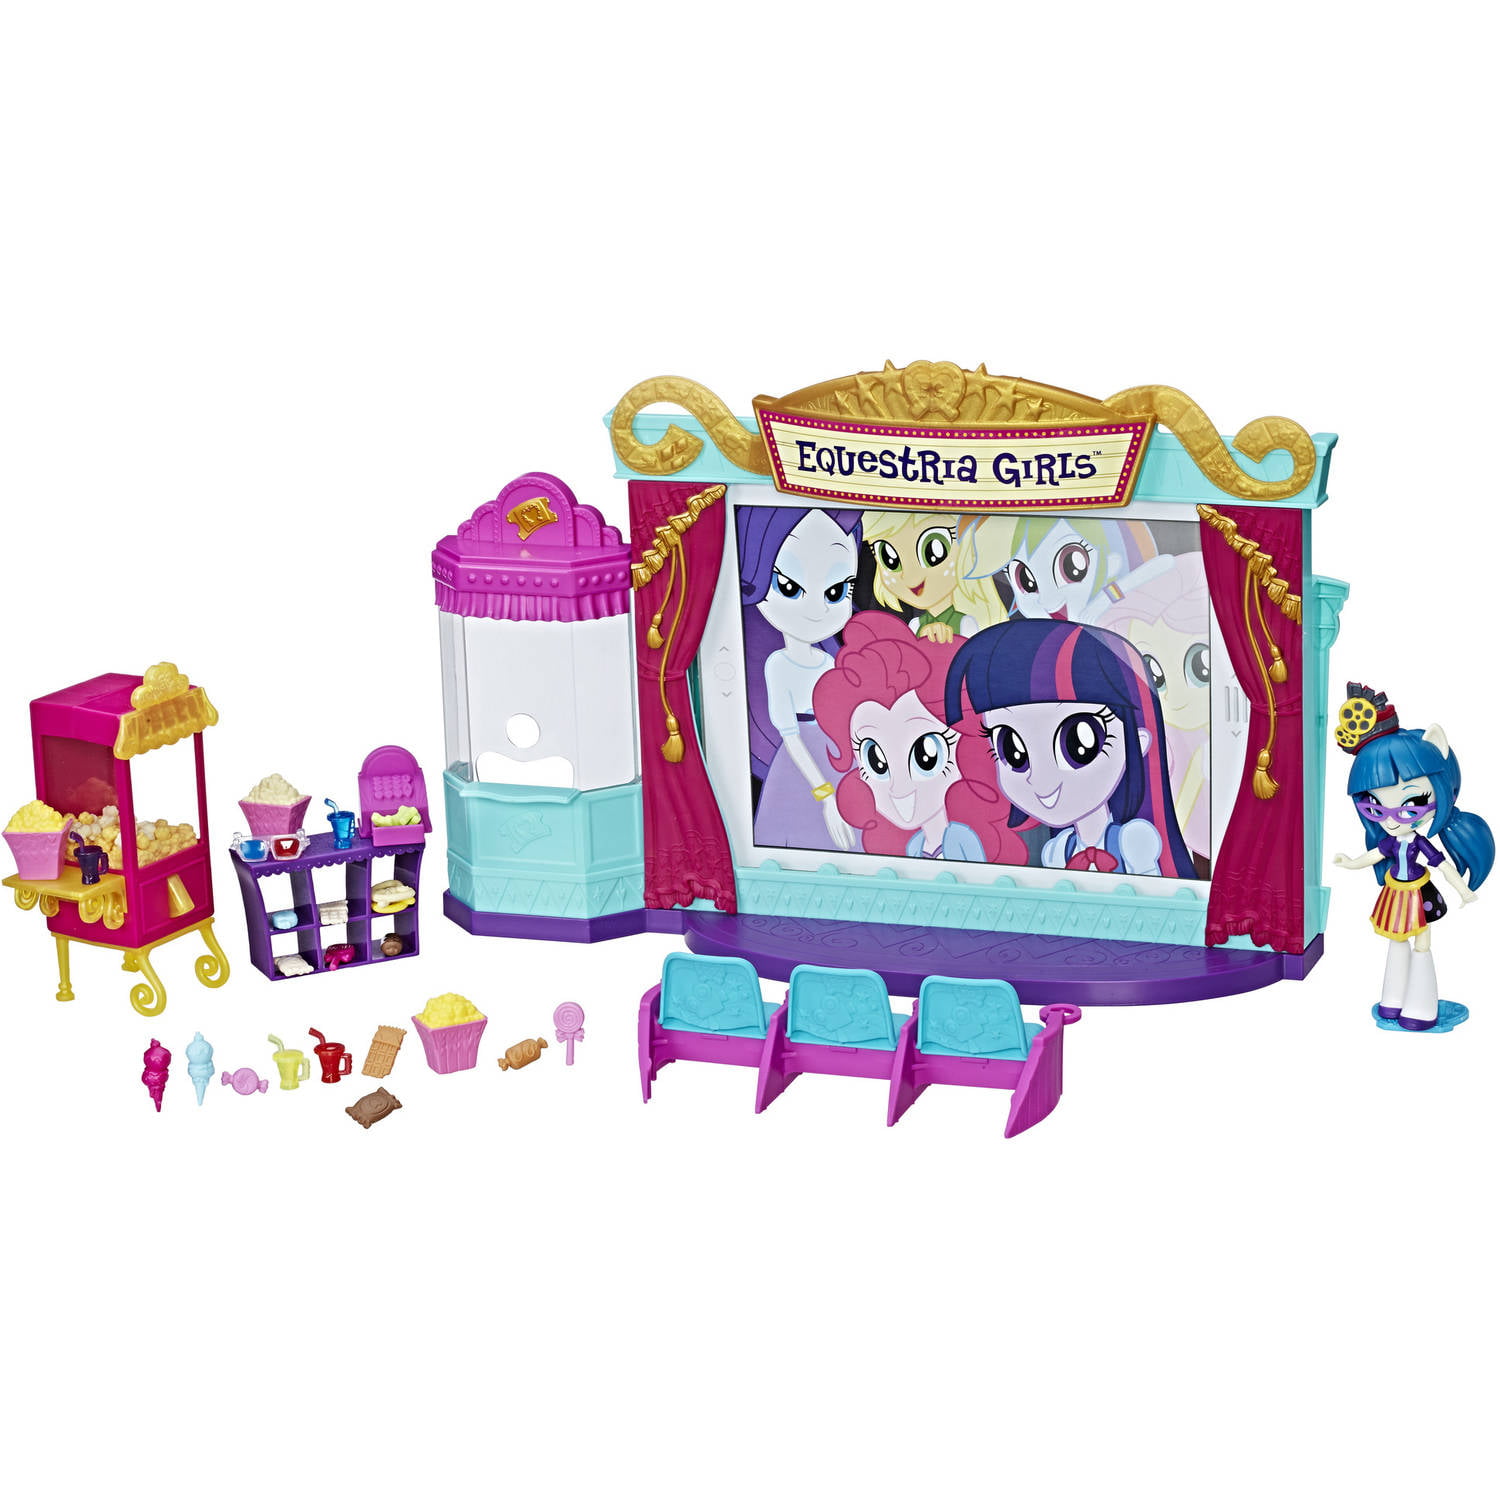 my little pony equestria girls minis toys